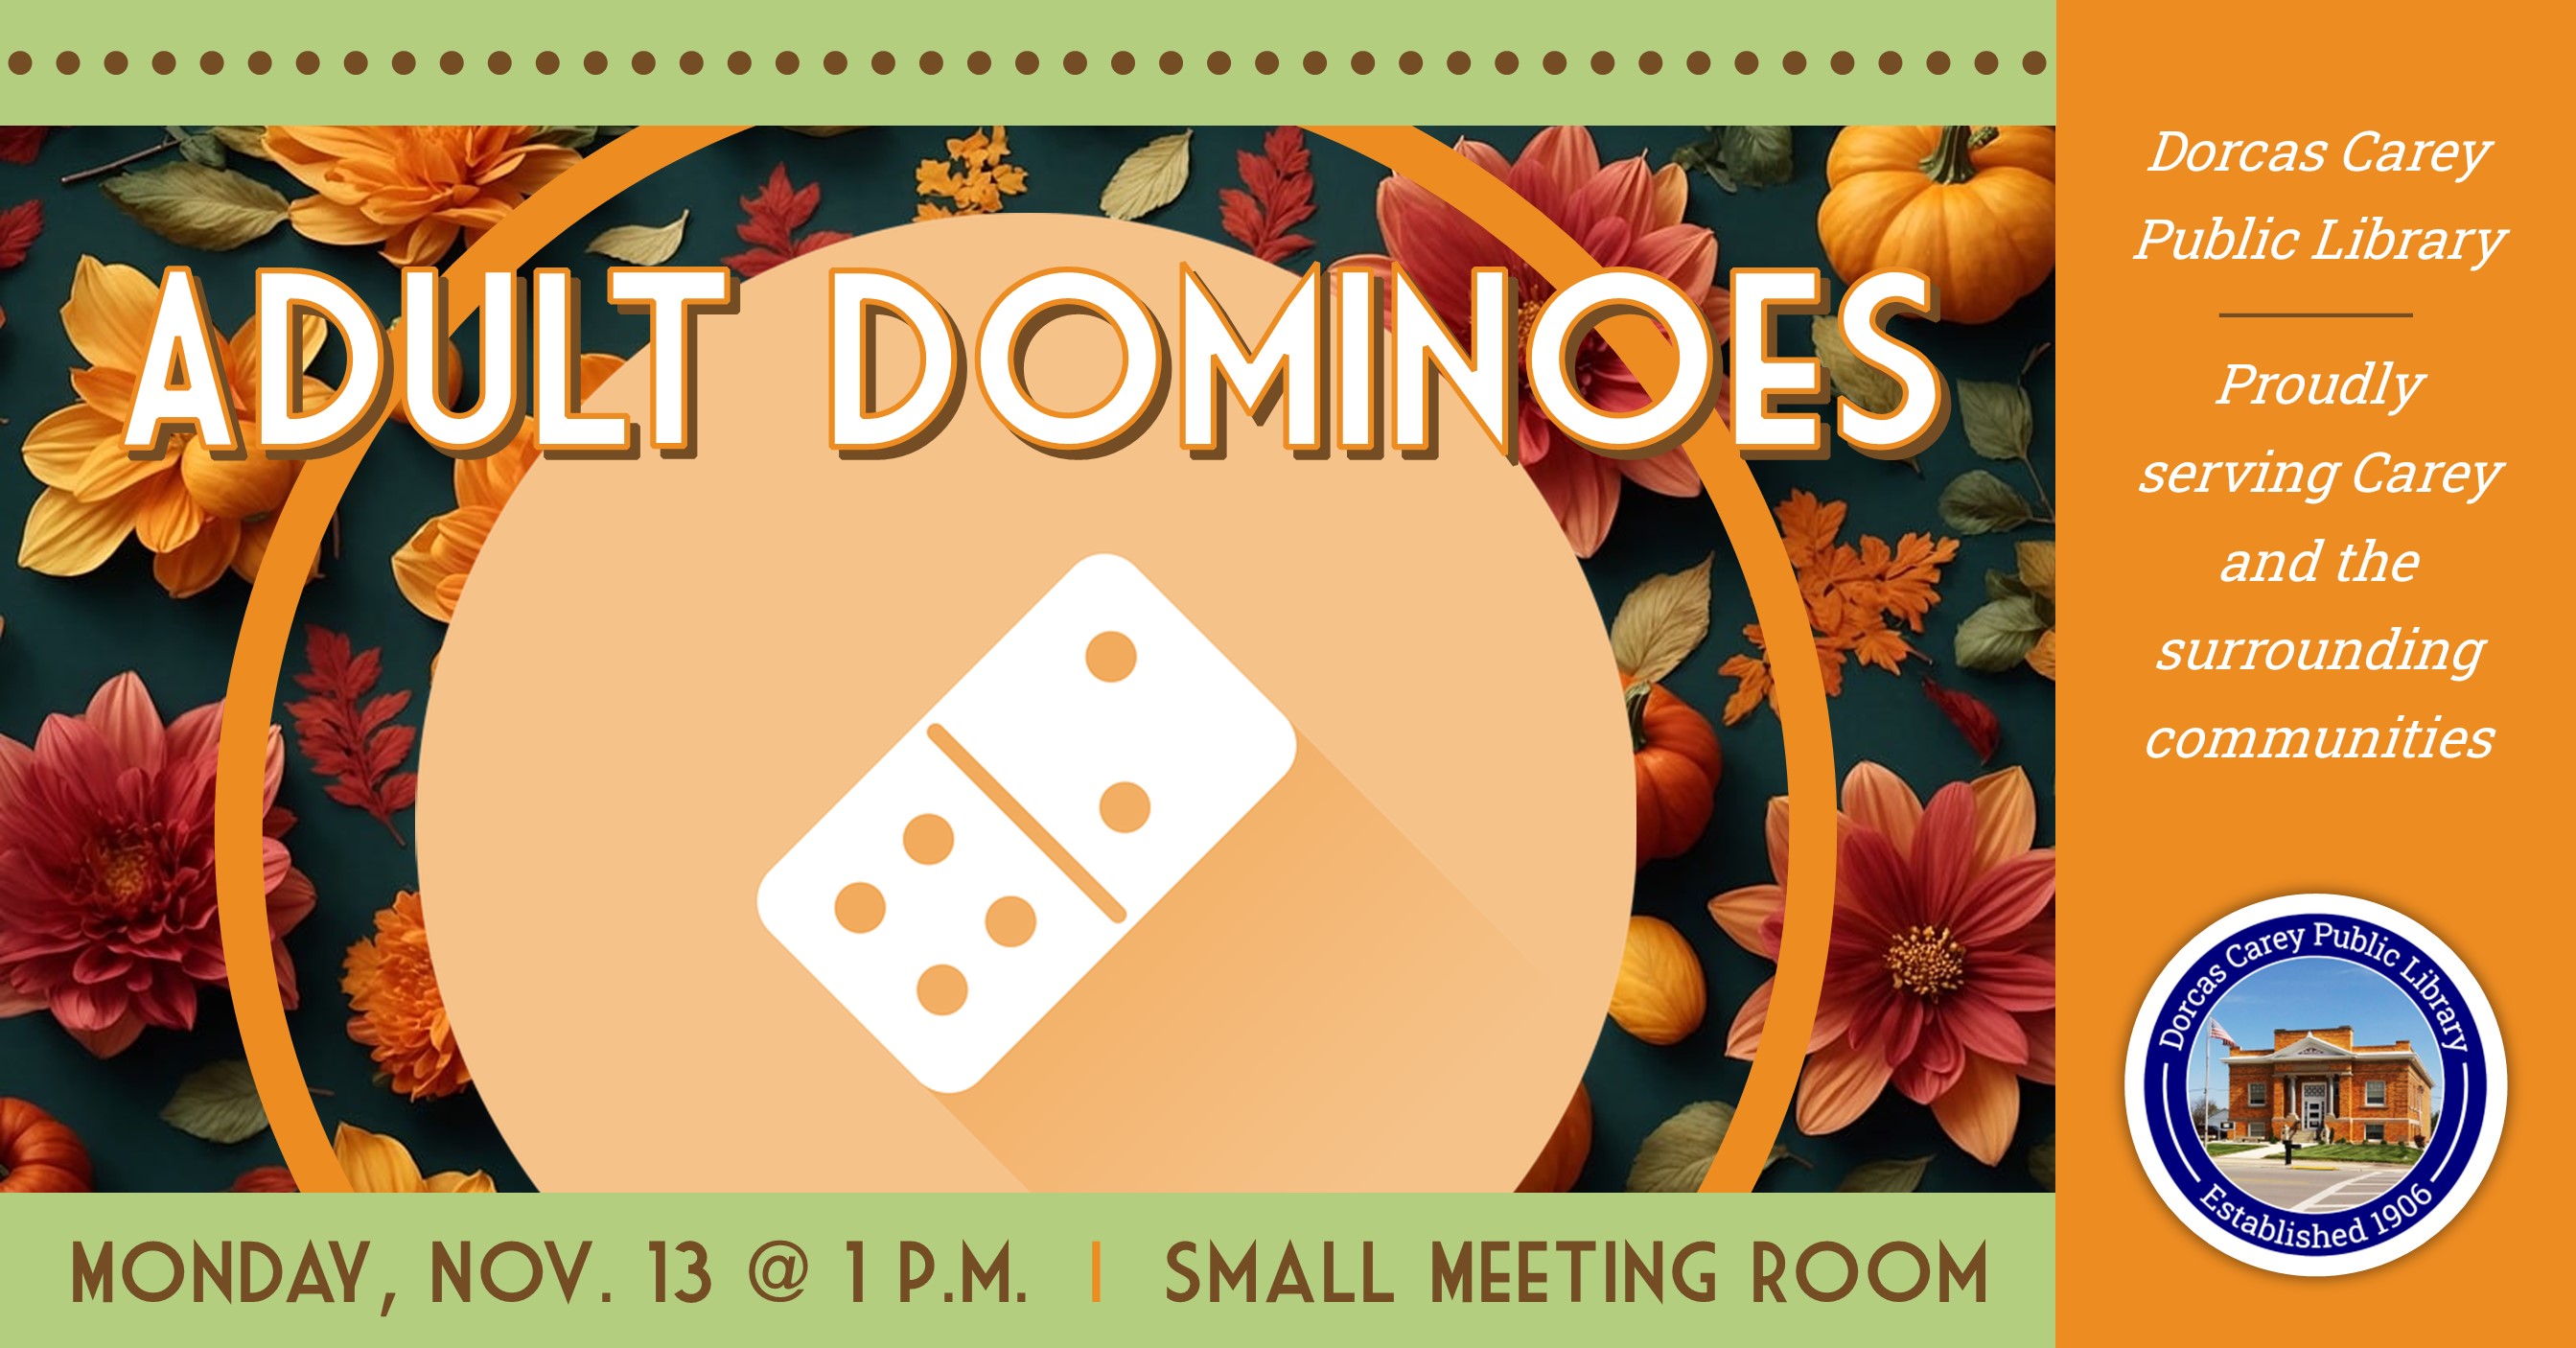 Join us at 1:00 p.m. on Monday, November 13th for Dominoes. Come enjoy the laughter and fun while strategizing your next play!